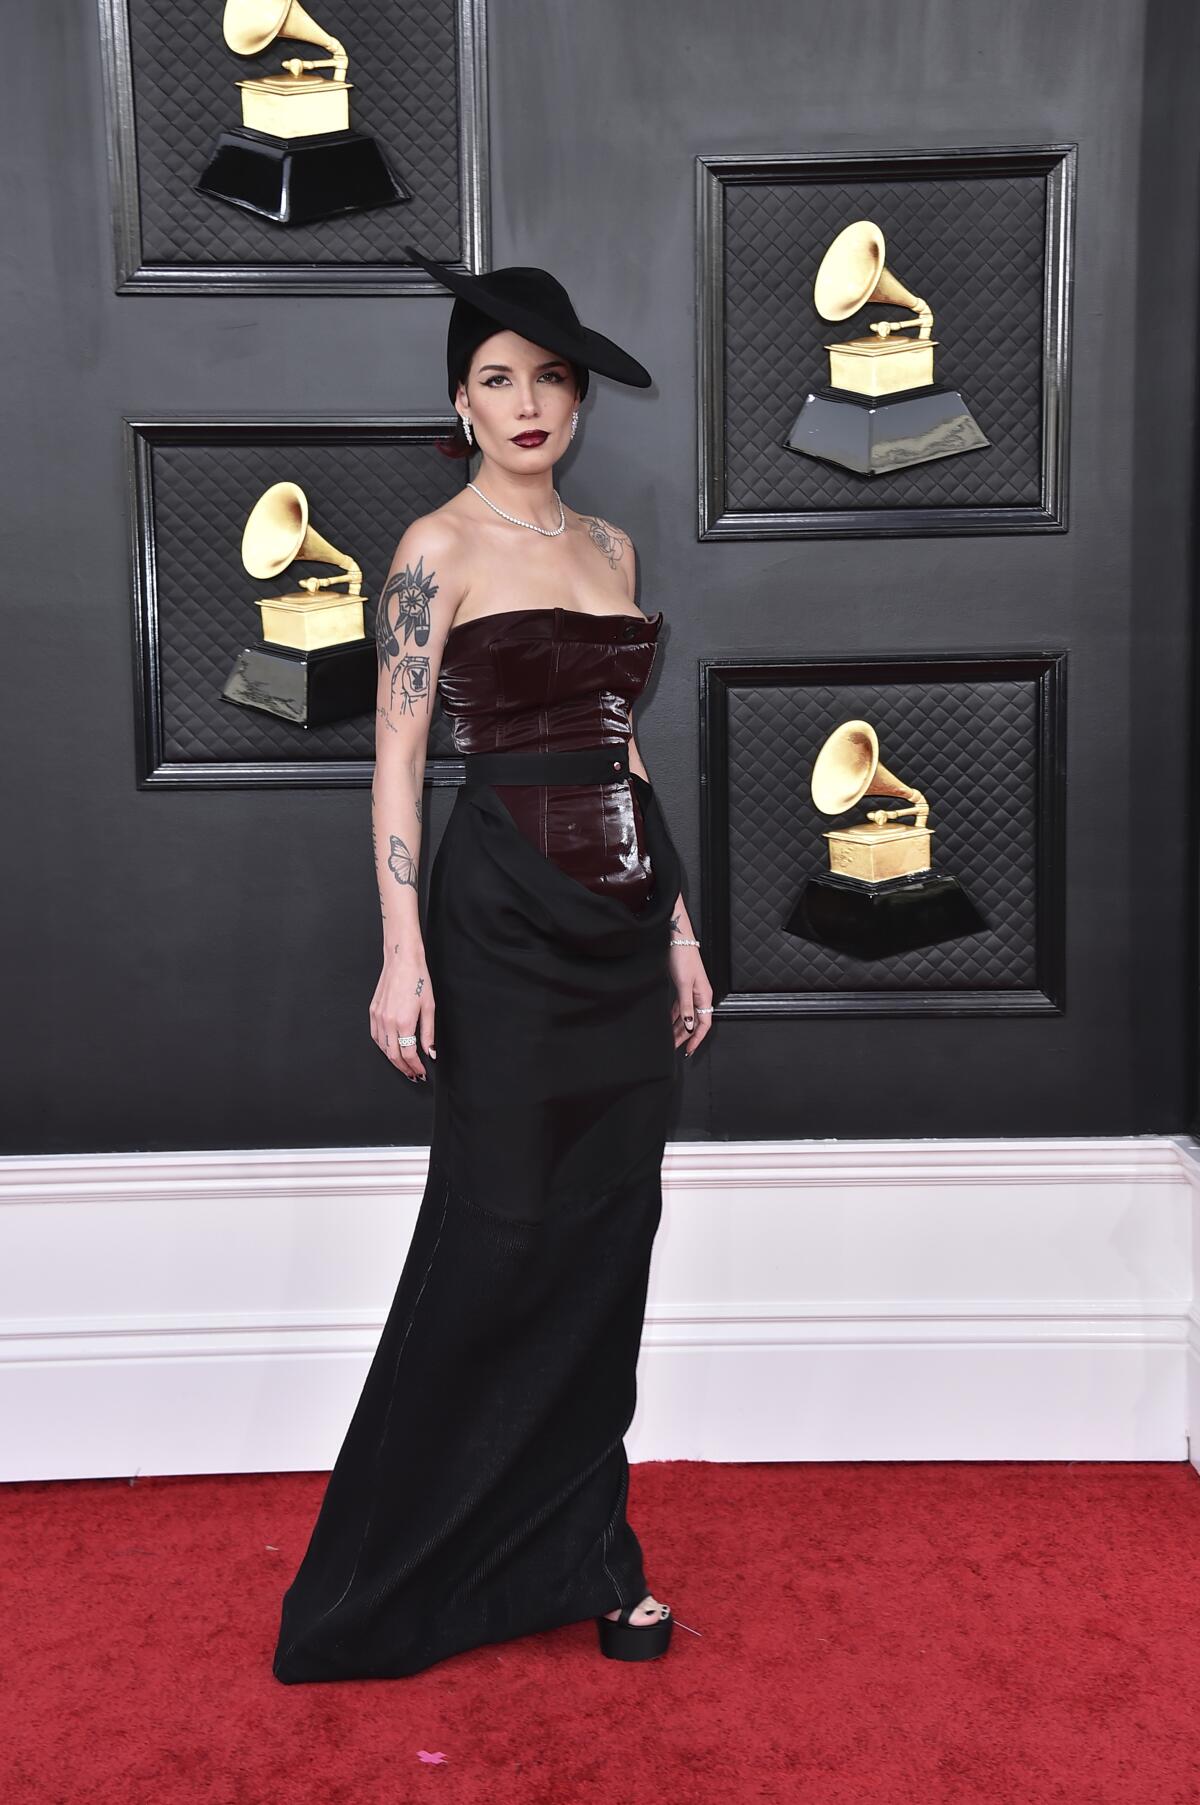 A female singer in a long black dress and a black hat walks the red carpet at the Grammys.